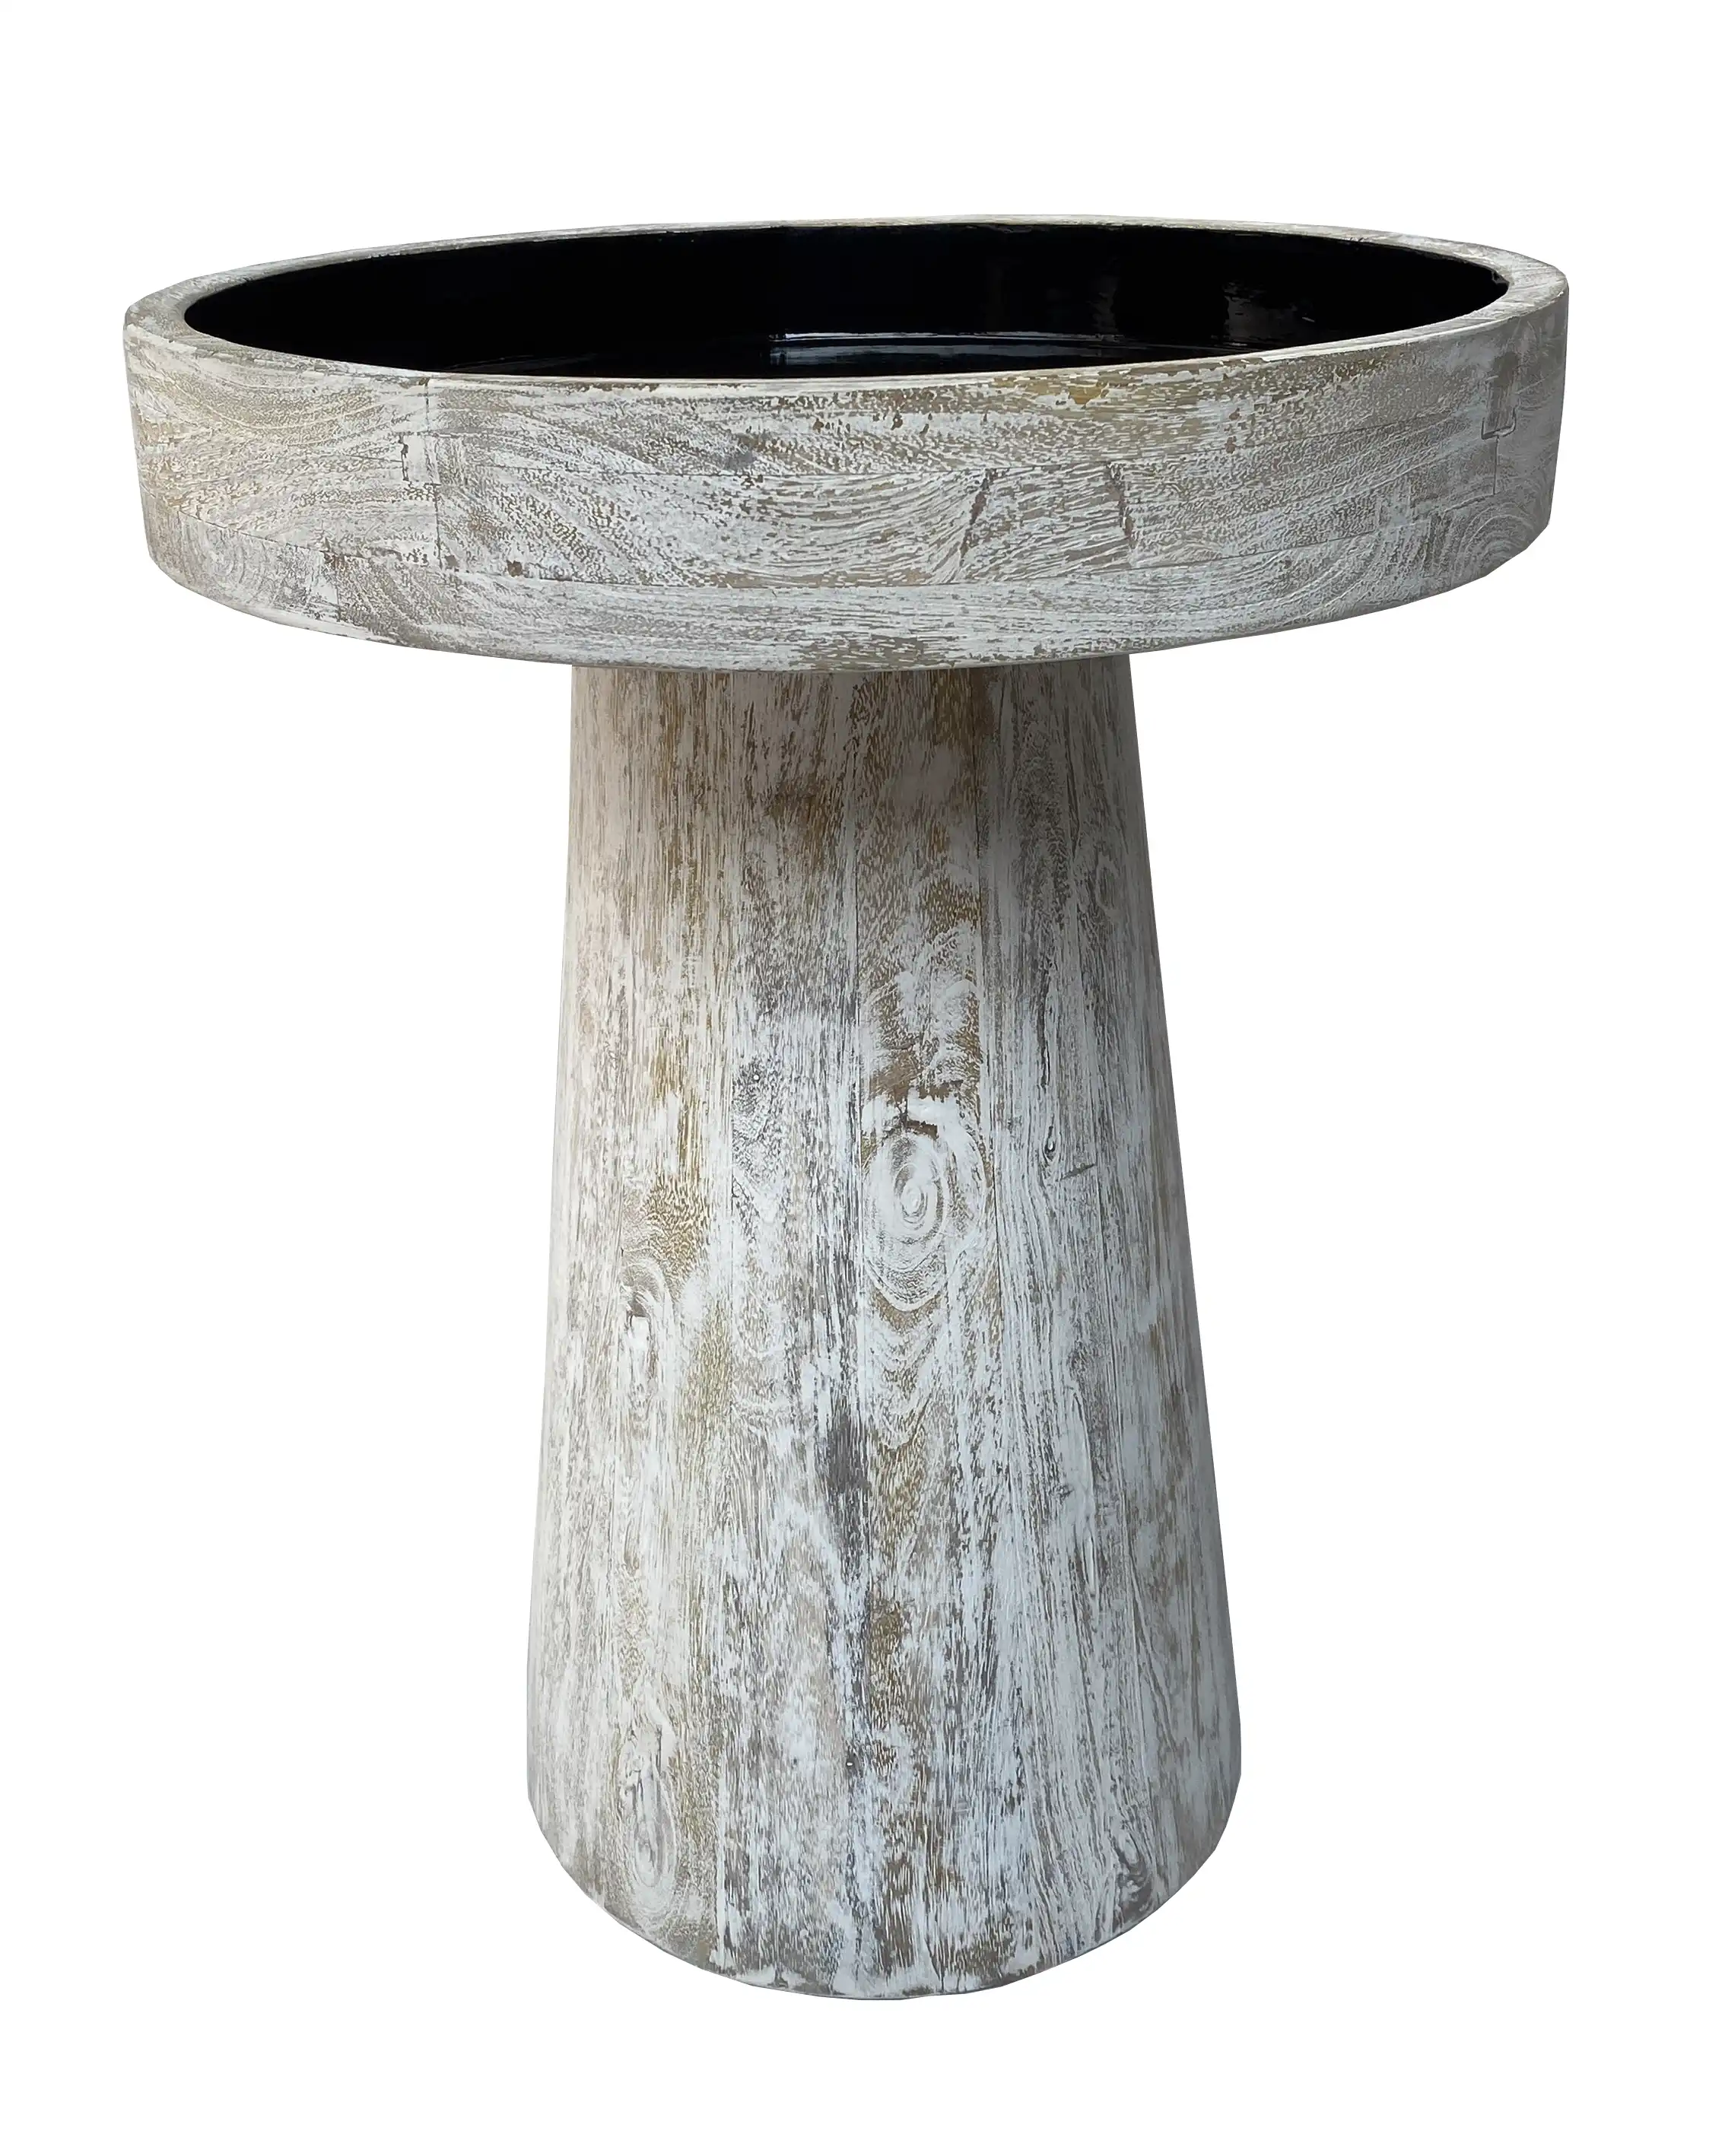 Wooden Hand Carved Side Table / Accent Table - popular handicrafts